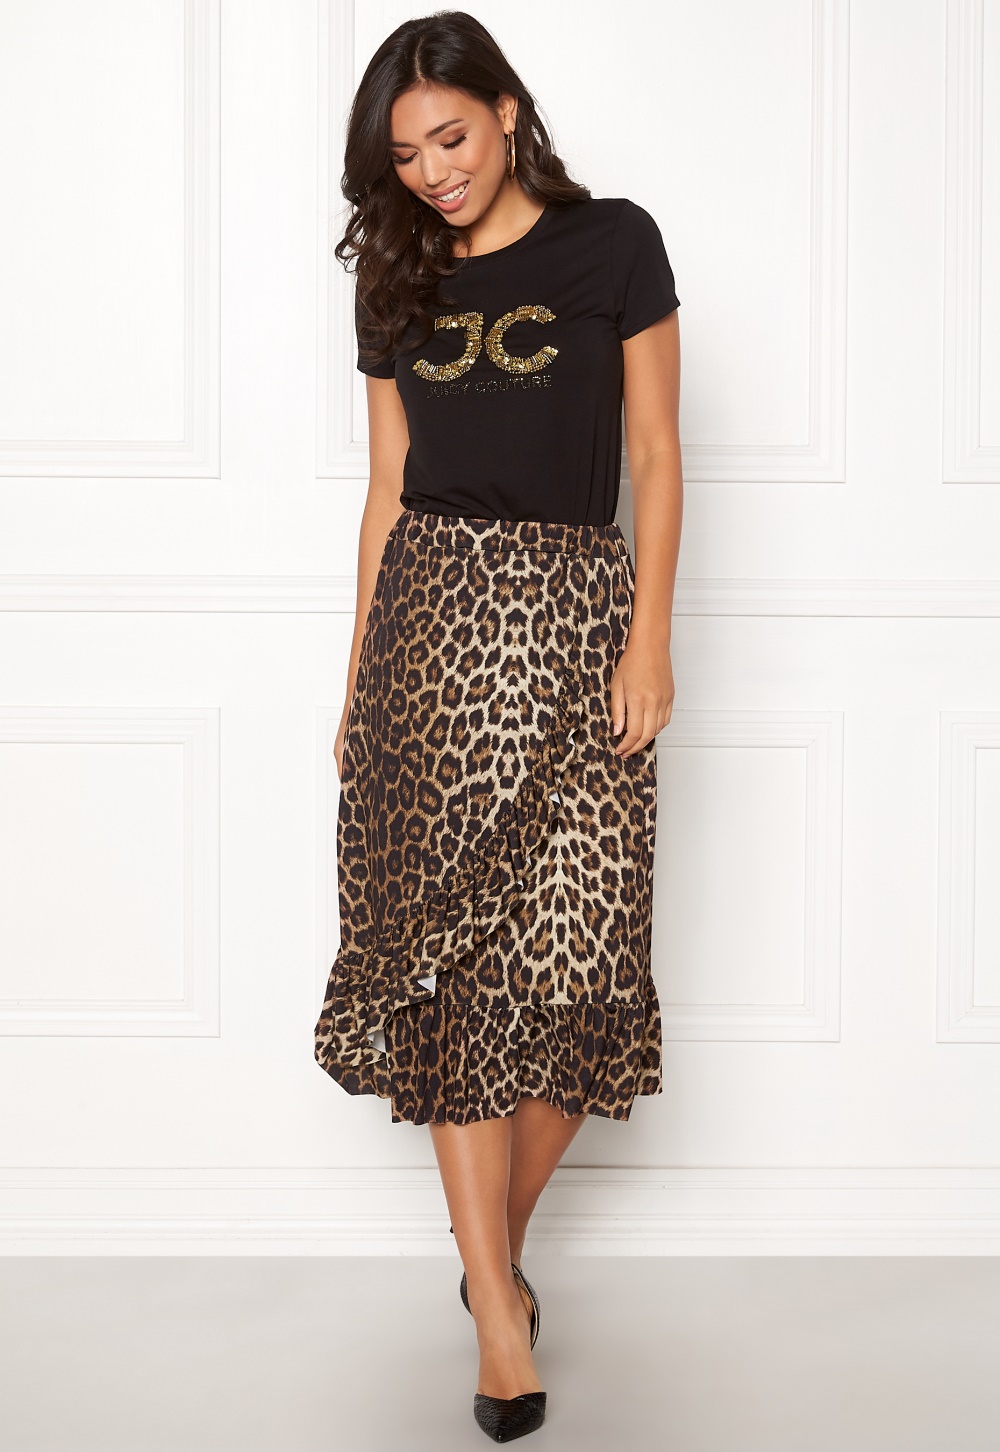 Juicy Couture JC Tee Pitch Black - Bubbleroom